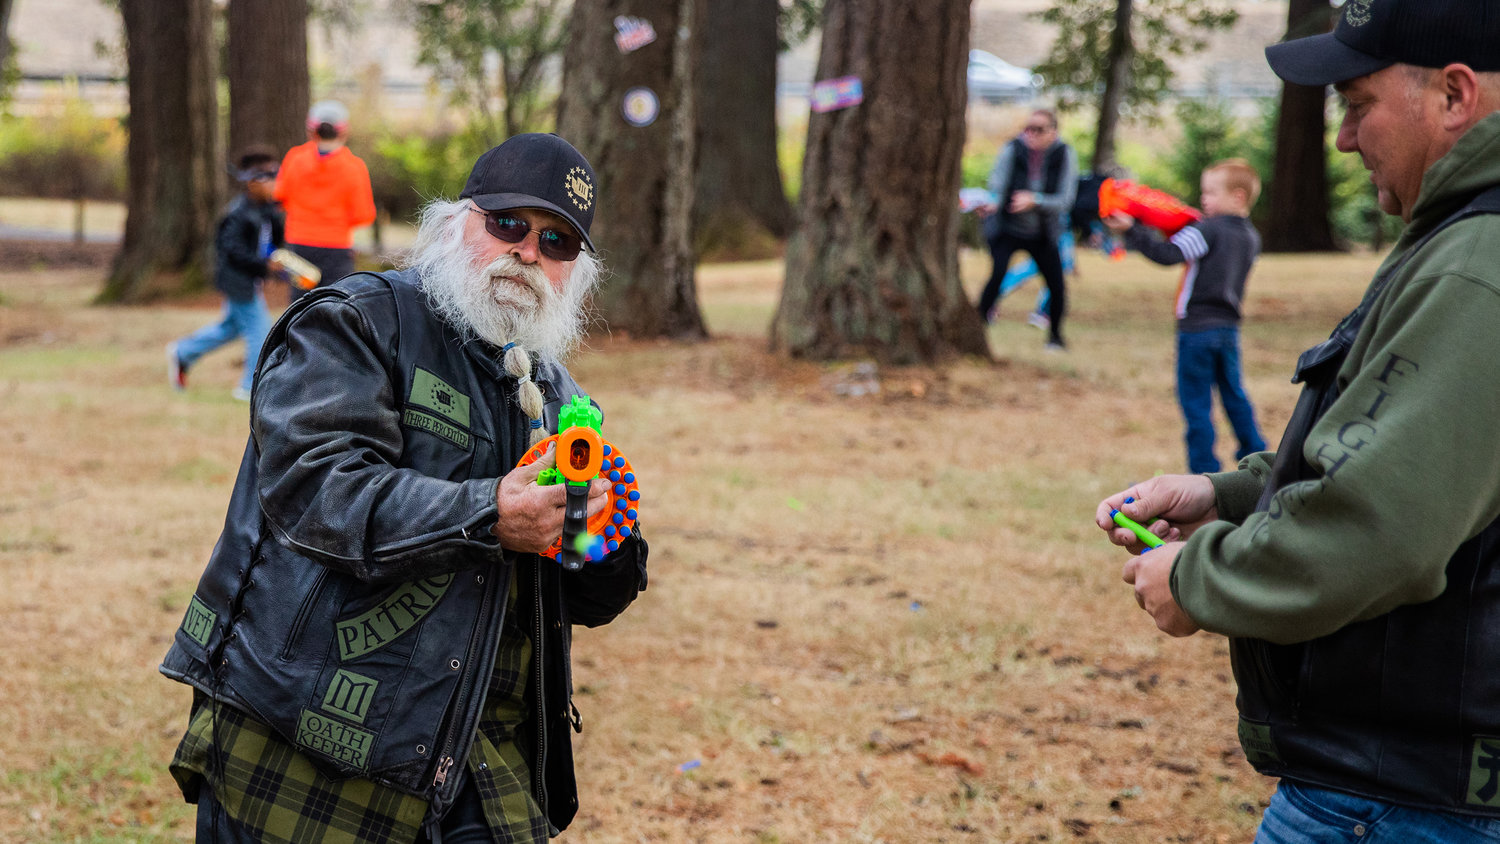 Members of the Freedom Fighters Motorcycle Association attend a Nerf War in honor of Titus Sickles and his Live Life List Fundraiser Sunday afternoon at Borst Park in Centralia.